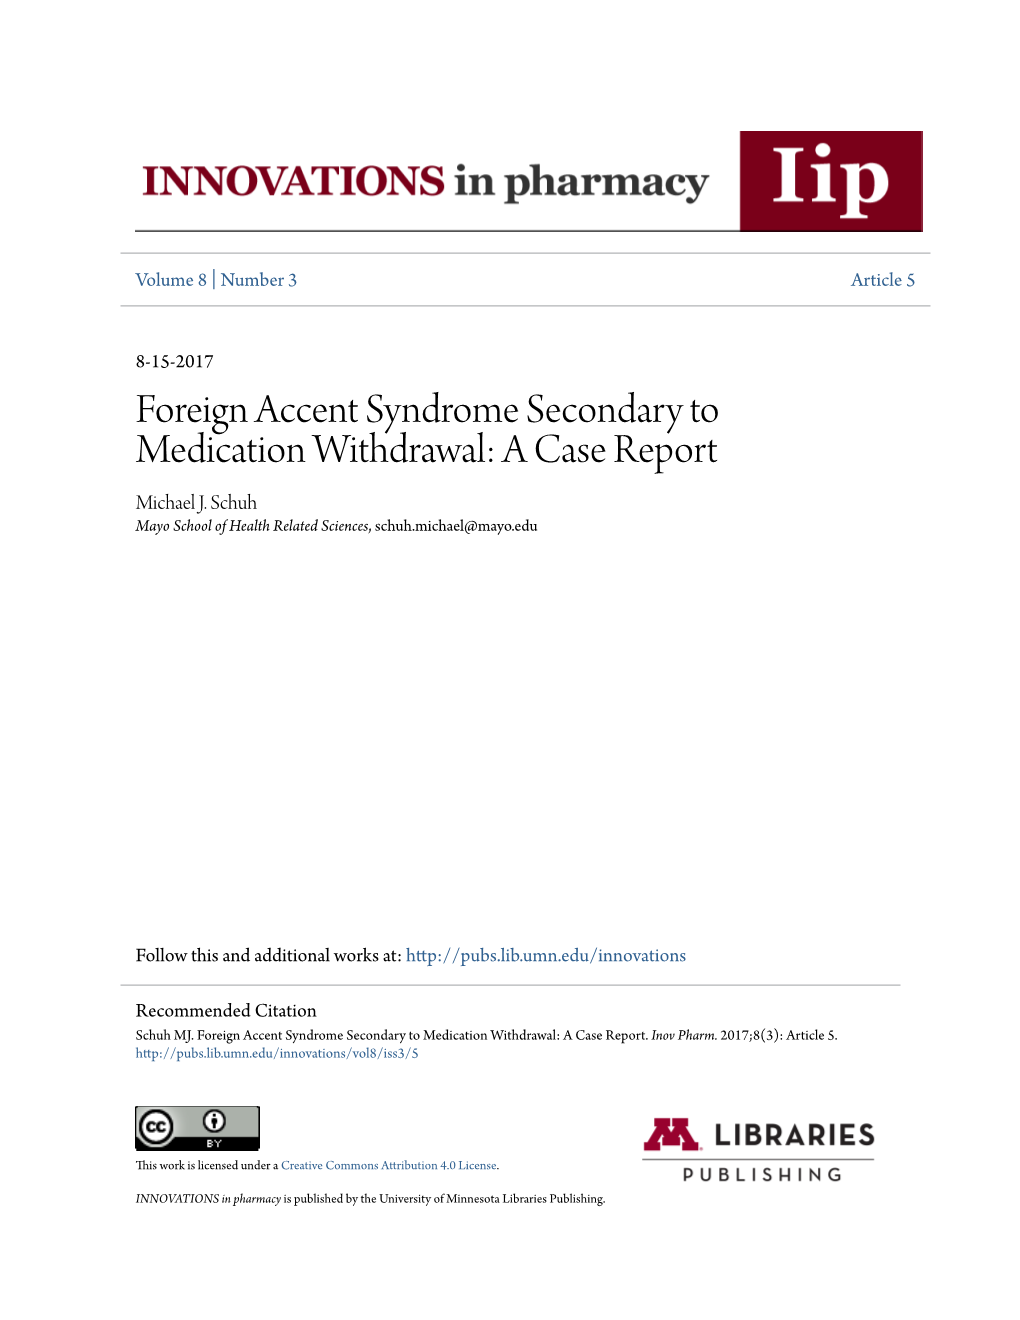 Foreign Accent Syndrome Secondary to Medication Withdrawal: a Case Report Michael J